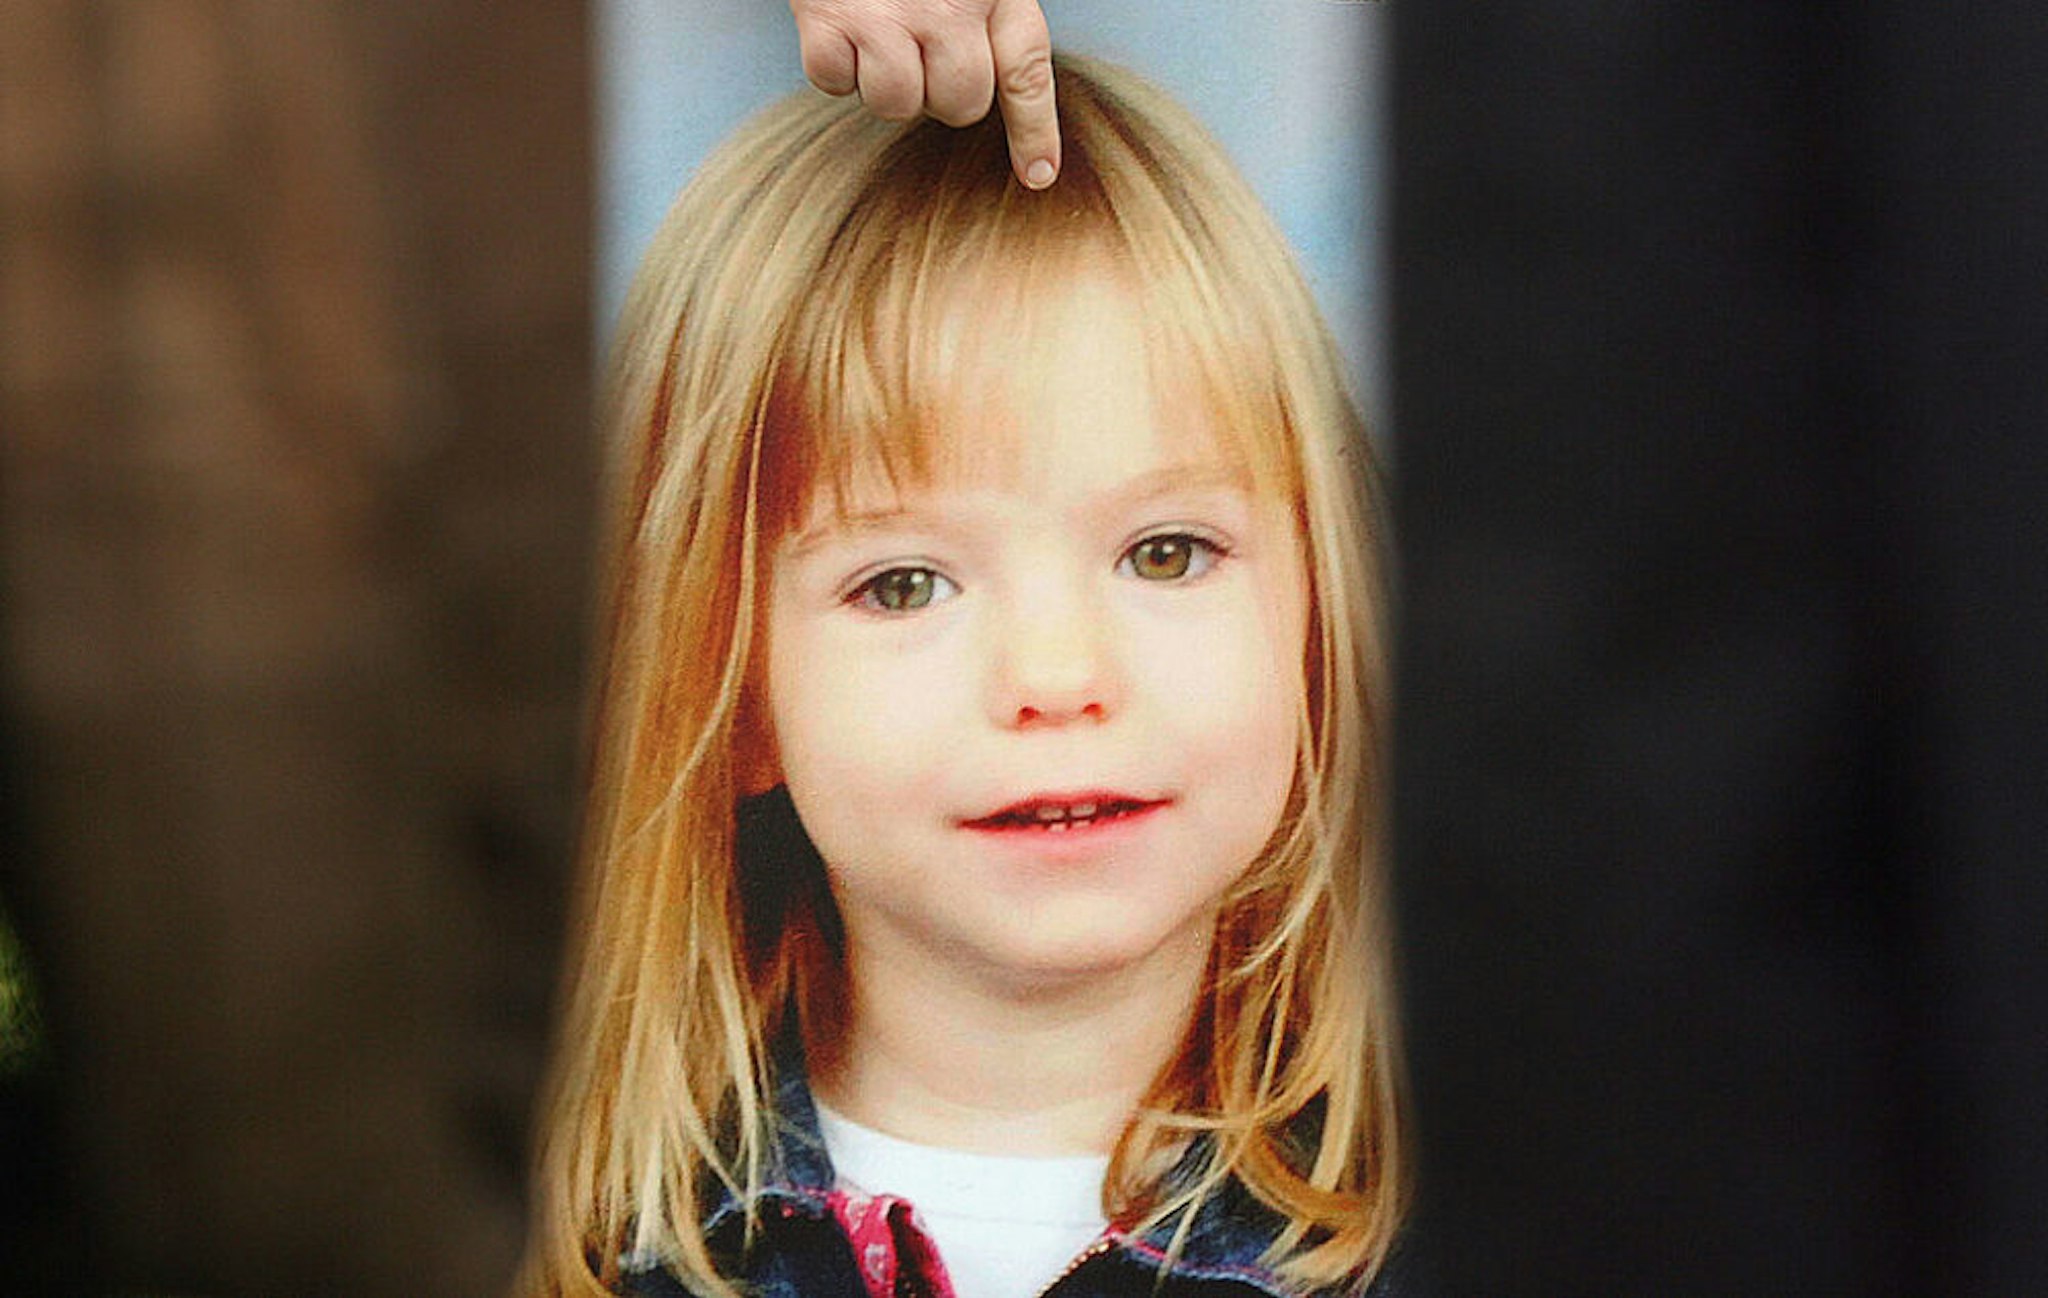 LONDON - MAY 16: A picture of missing toddler Madeleine McCann is held by her aunt Philomena McCann as she gives television interviews after visiting Parliament on May 16, 2007 in London. Madeleine McCann disappeared from a holiday complex in Praia da Luz, Portugal 13 days ago.